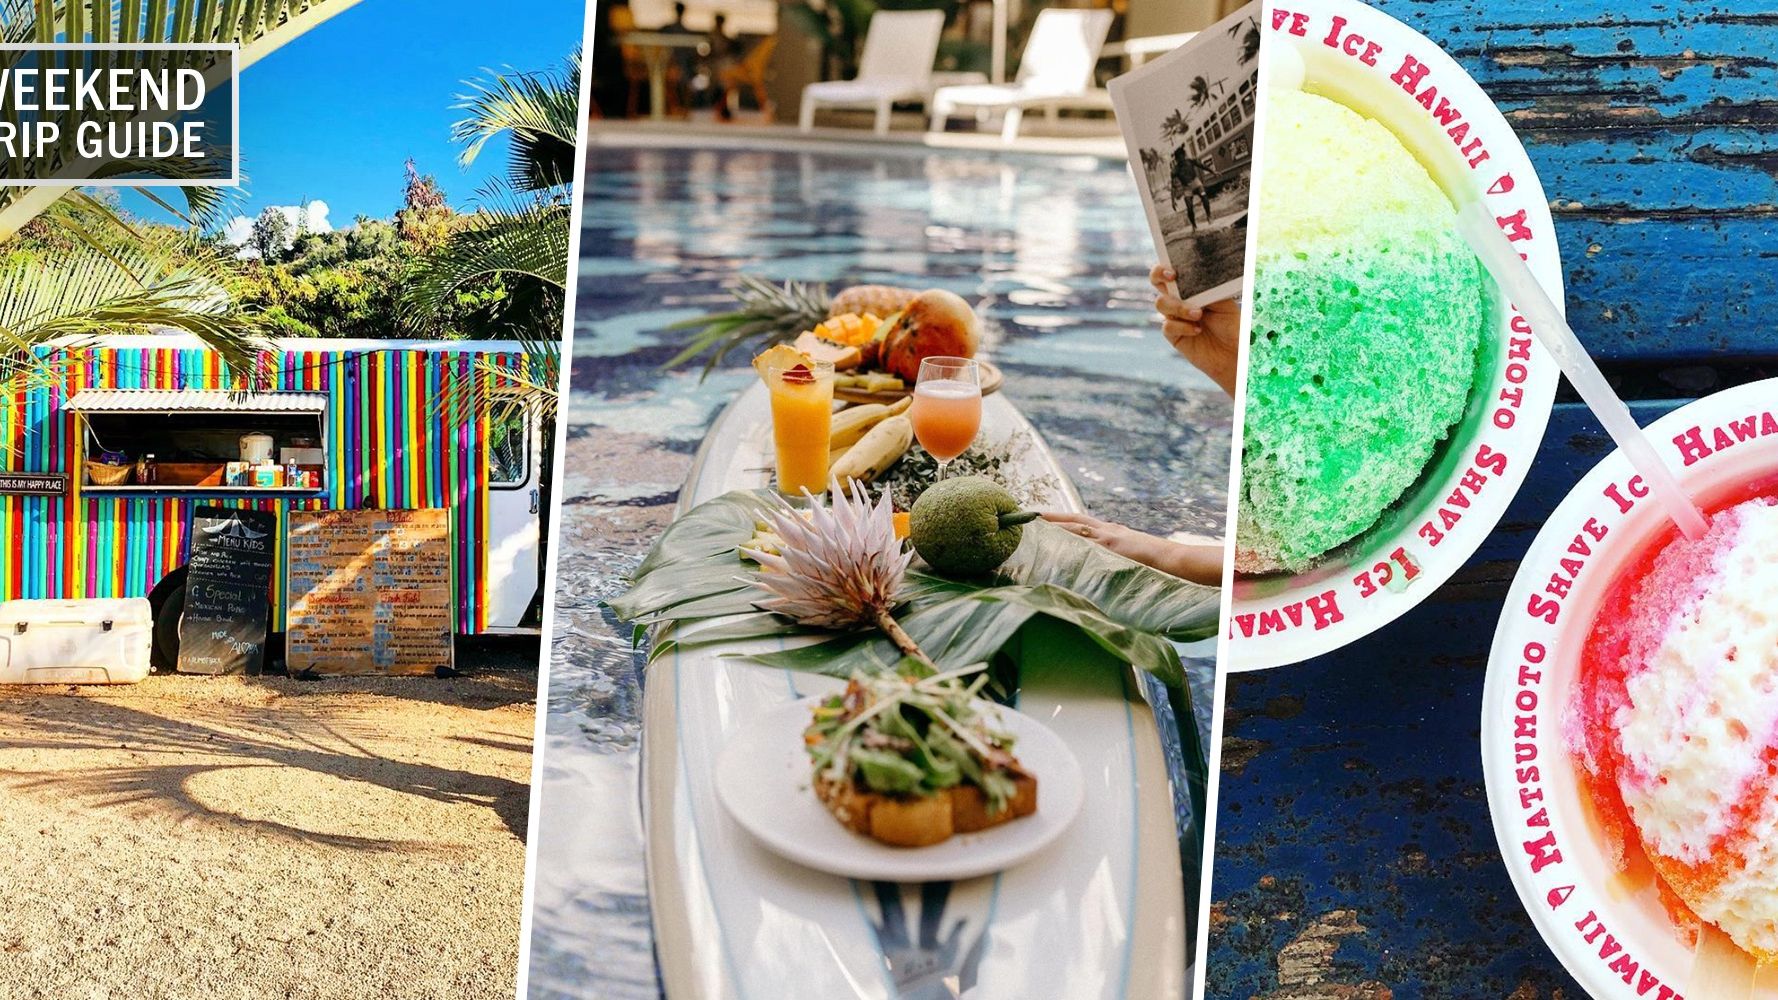 Weekend Trip Guide Where to Stay, Eat, and Drink in Honolulu, Hawaii Marie Claire image